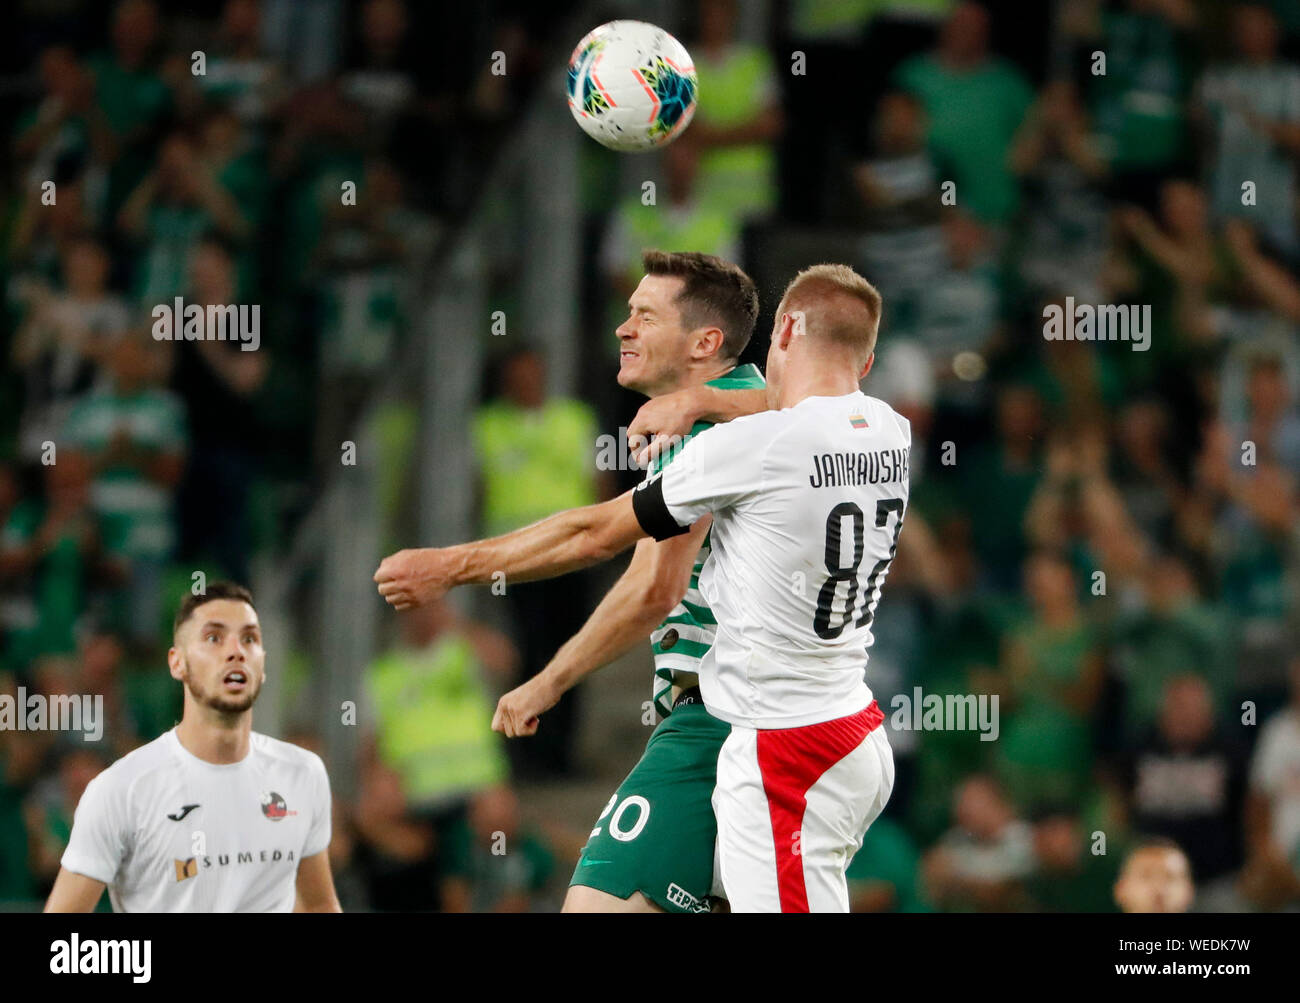 BUDAPEST, HUNGARY - AUGUST 29: (r-l) Algis Jankauskas of FK Suduva battles for the ball in the air with Nikolai Signevich of Ferencvarosi TC before Jovan Cadjenovic of FK Suduva during the UEFA Europa League Play-off Second Leg match between Ferencvarosi TC and FK Suduva at Ferencvaros Stadium on August 29, 2019 in Budapest, Hungary. Stock Photo